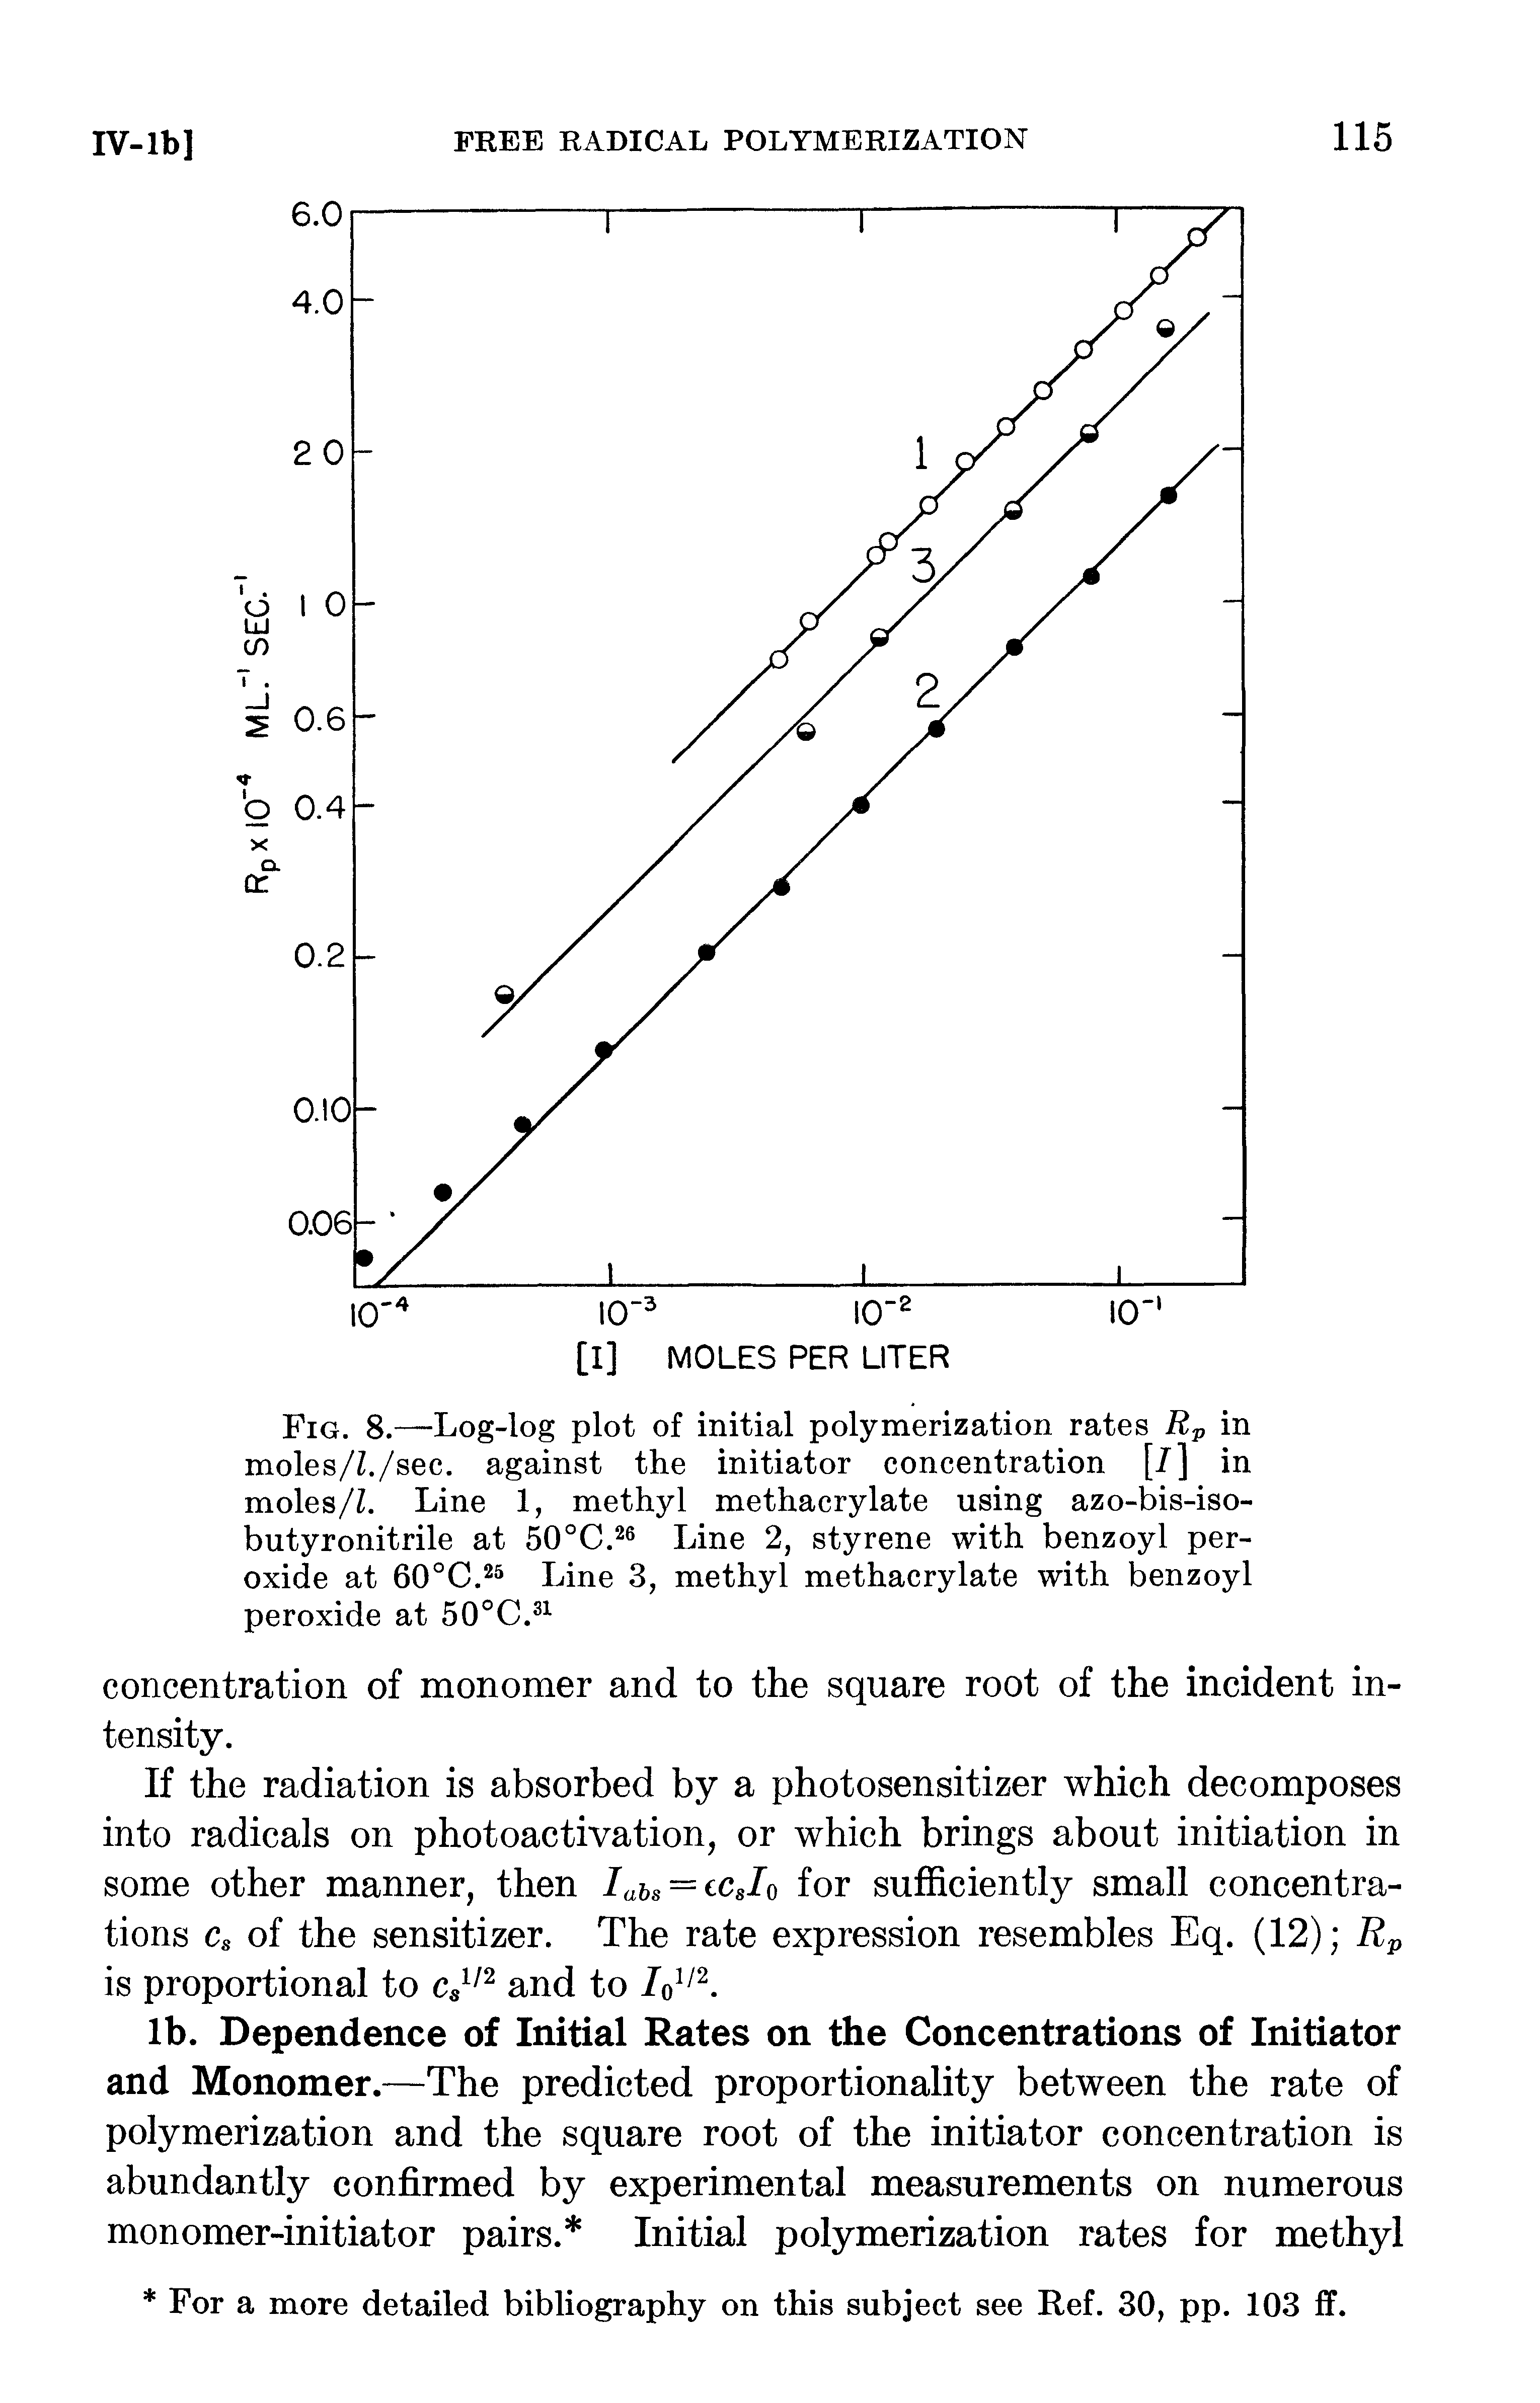 Fig. 8.—Log-log plot of initial polymerization rates Rj, in moles/Z./sec. against the initiator concentration [I] in moles/Z. Line 1, methyl methacrylate using azo-bis-iso-butyronitrile at 50°C.26 Line 2, styrene with benzoyl peroxide at 60°C.25 Line 3, methyl methacrylate with benzoyl peroxide at 50°C. ...